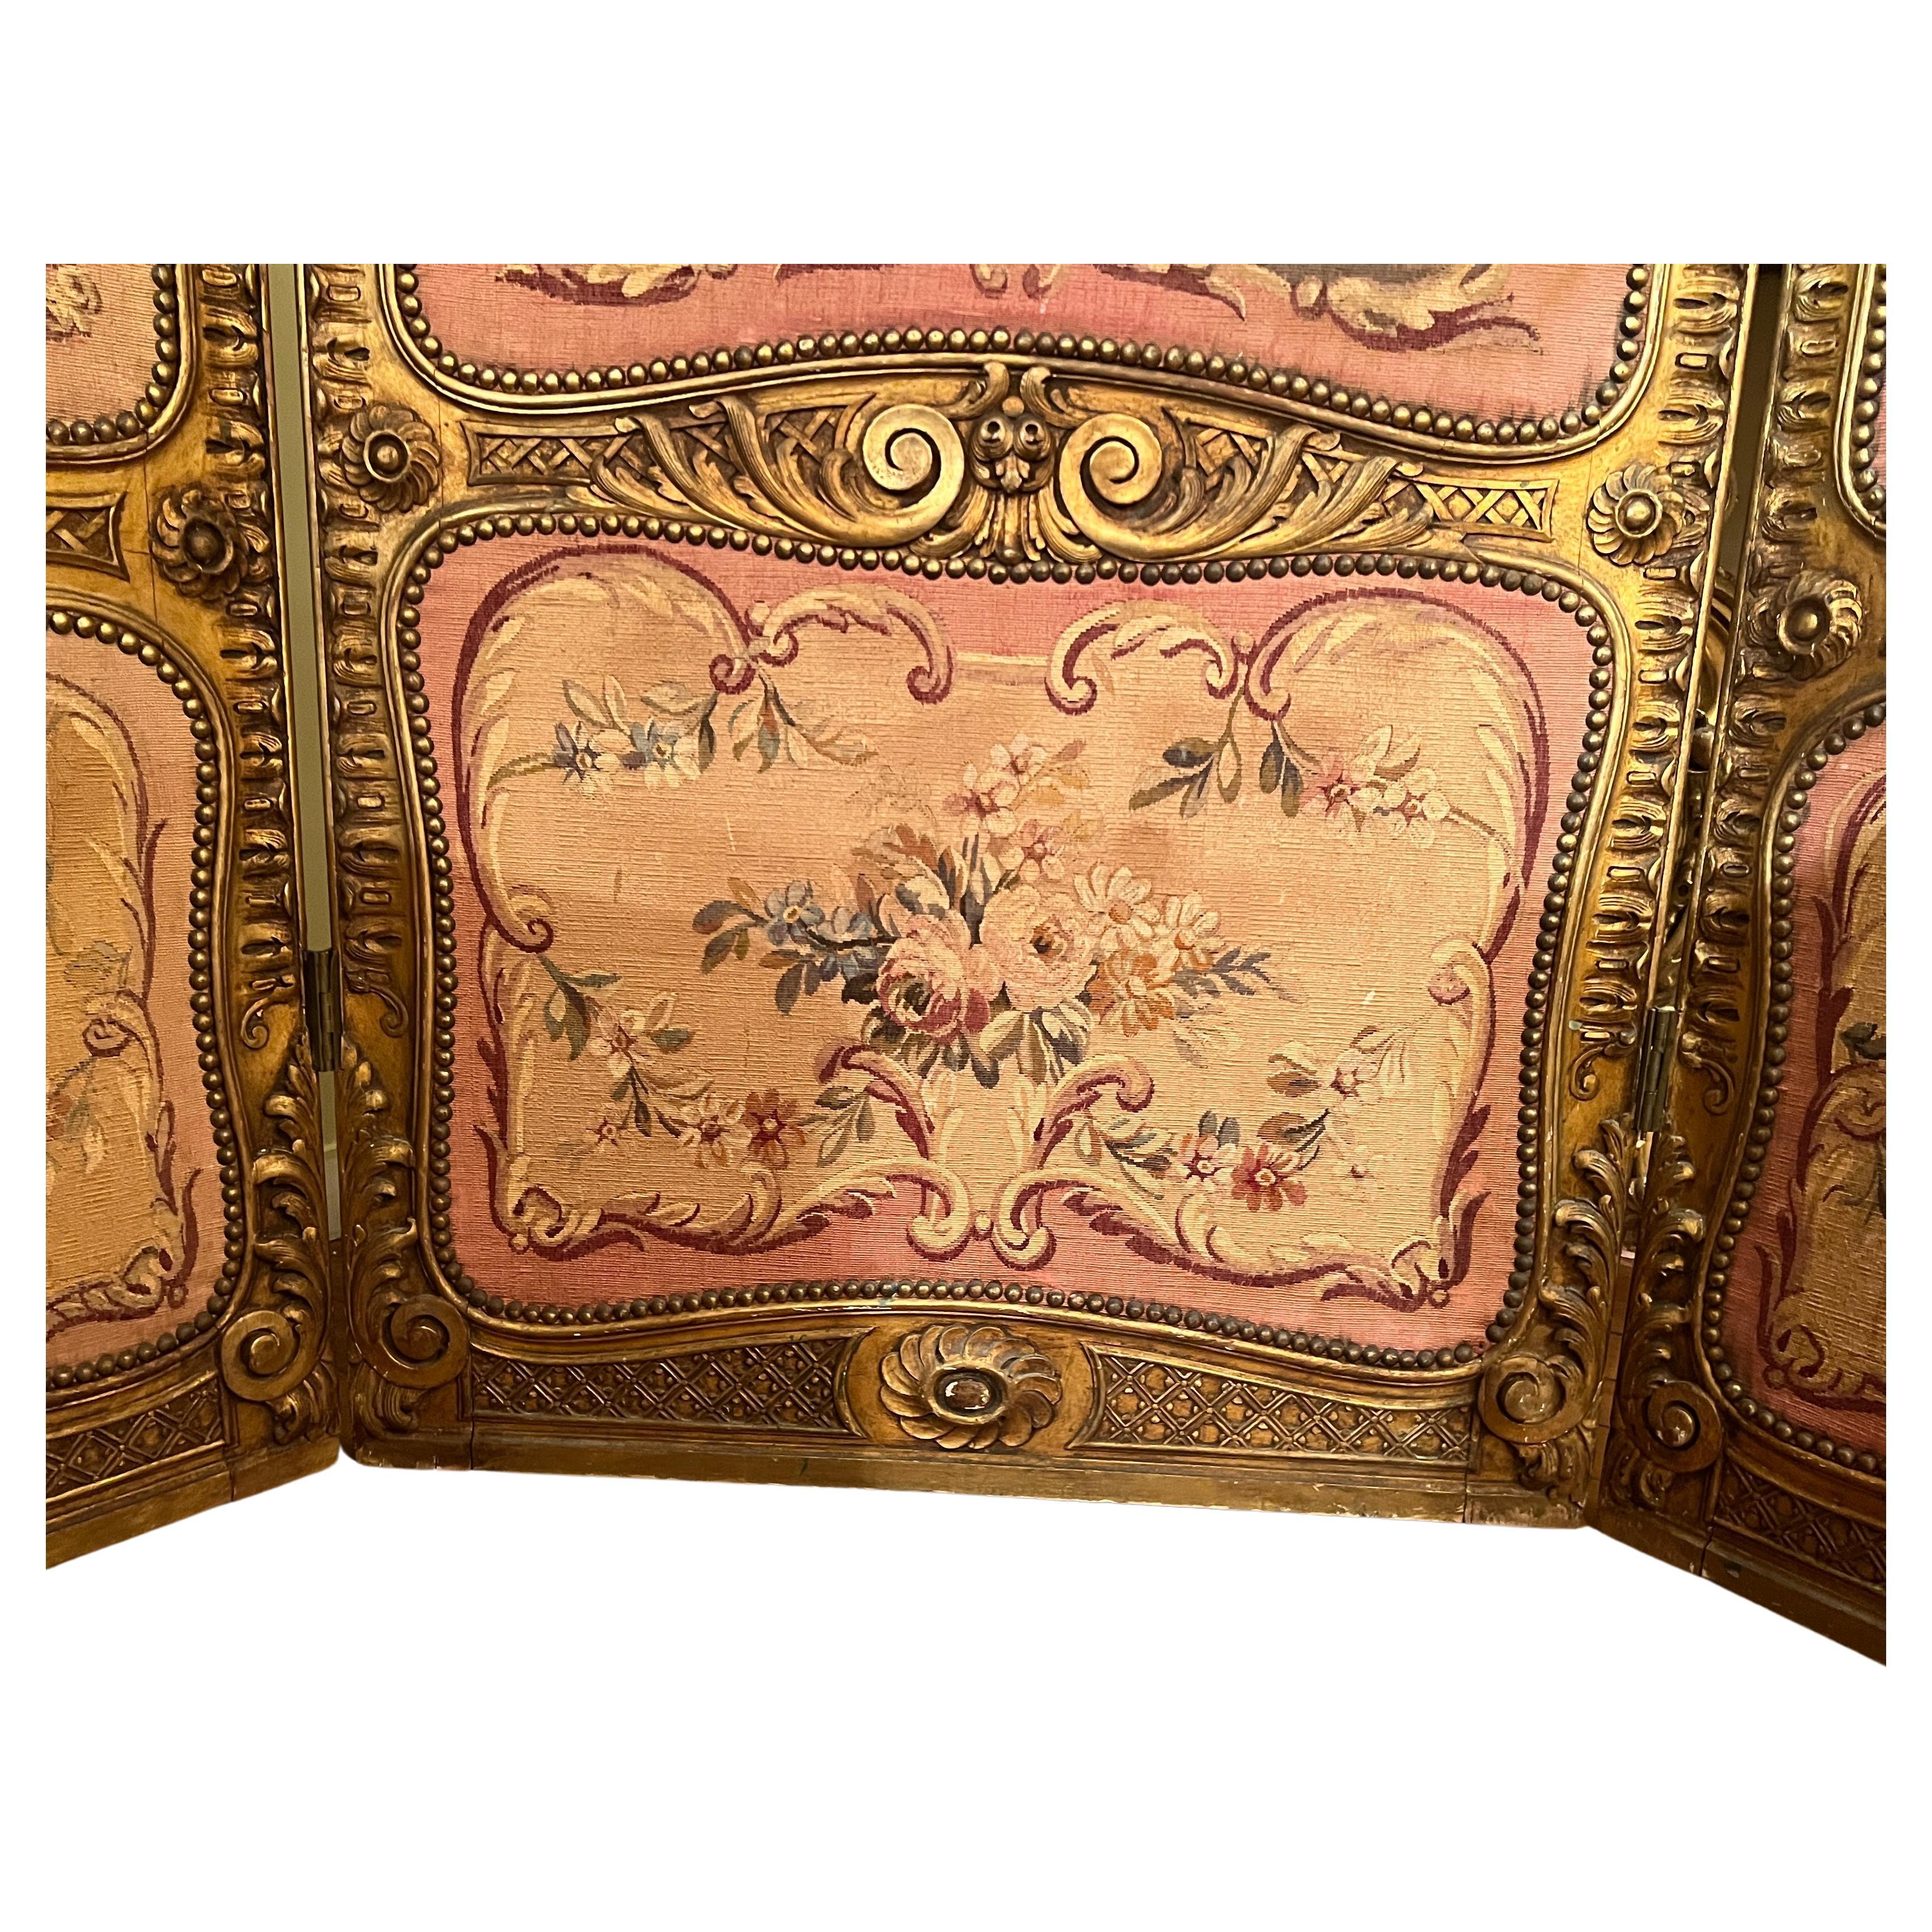 19th Century Antique French Aubusson Tapestry 3 Panel Folding Screen, Circa 1865-1885. For Sale